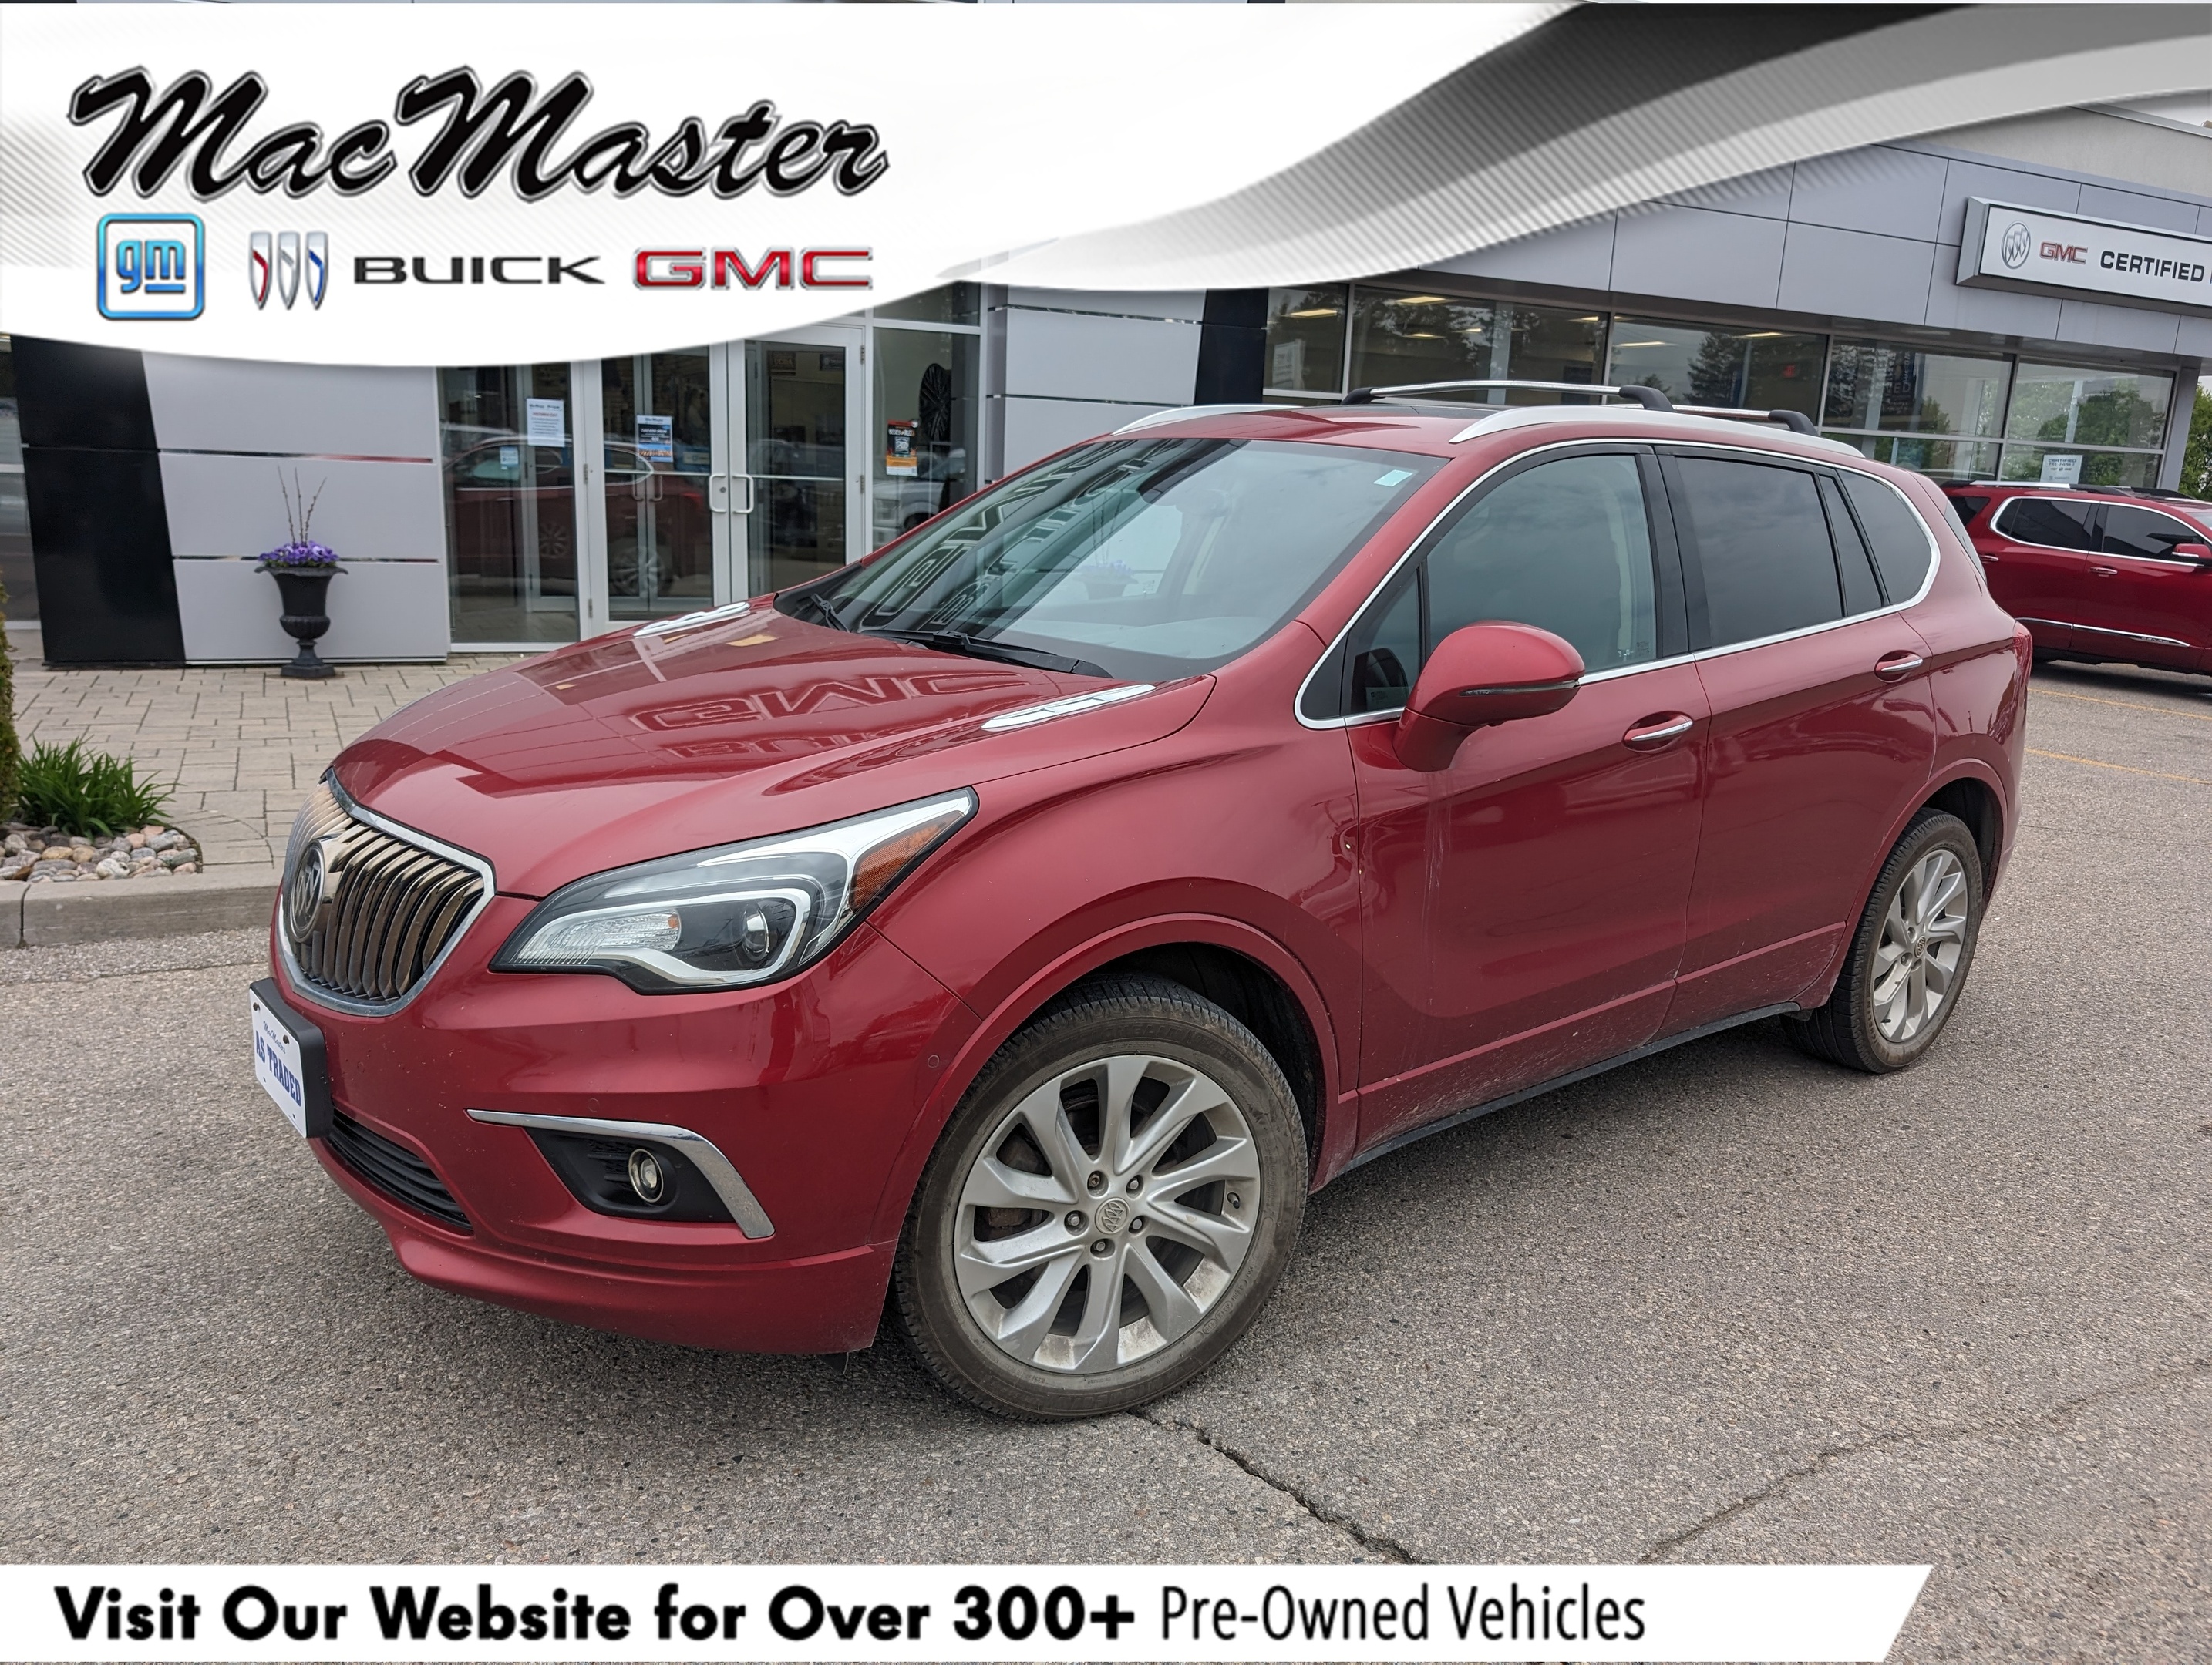 2016 Buick Envision PREMIUM II AWD, 2.0T, NAV, ROOF, HTD/COOL, 1-OWNER